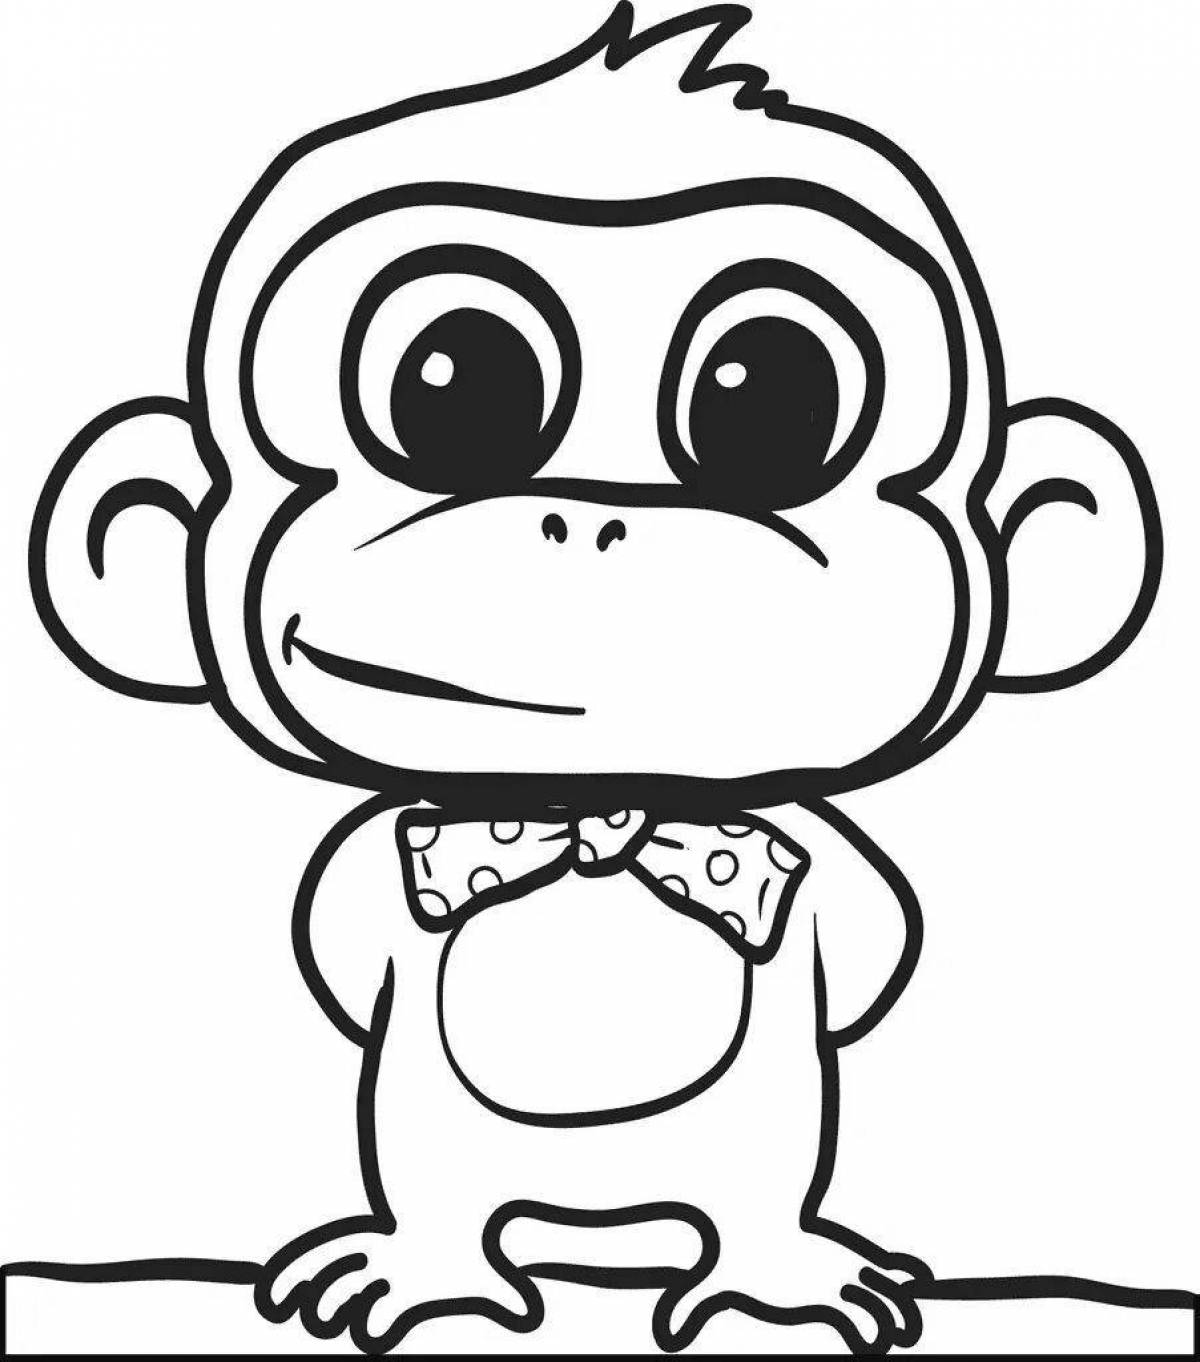 Amazing monkey coloring book for kids